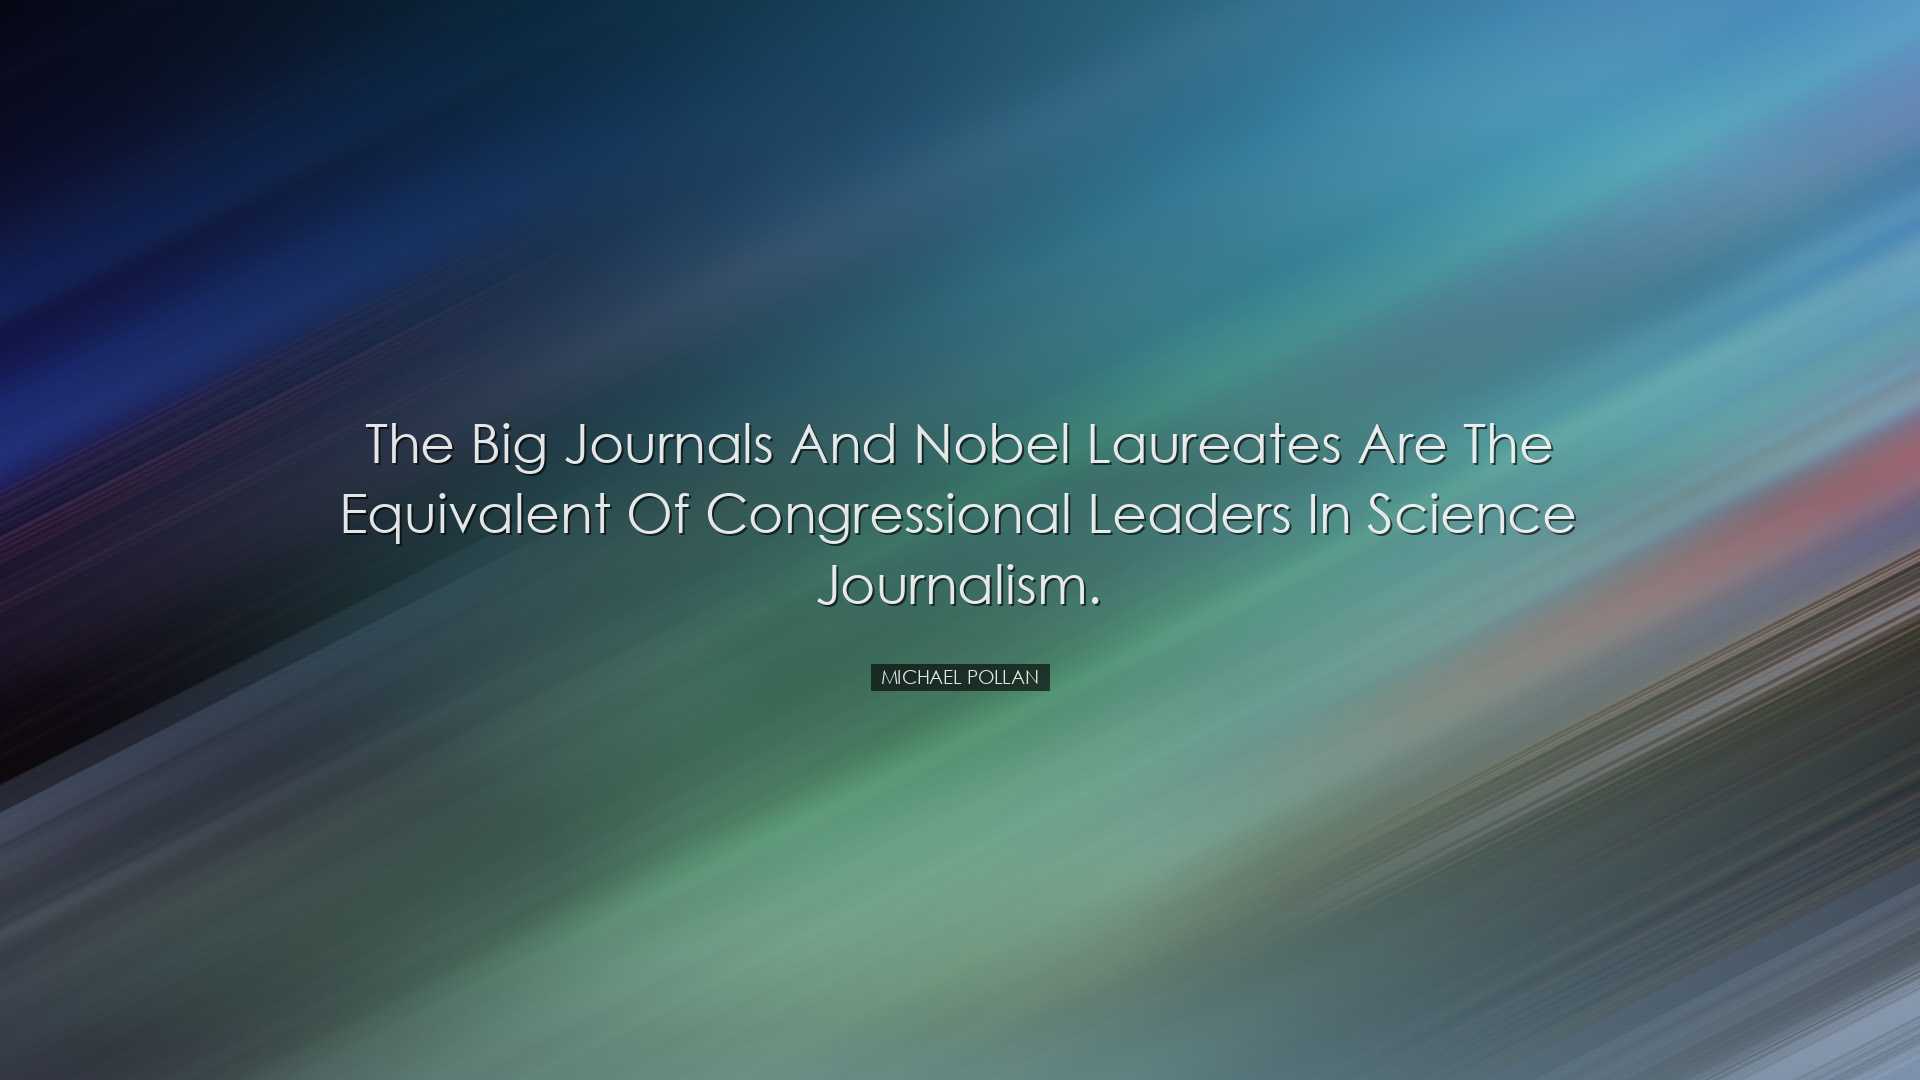 The big journals and Nobel laureates are the equivalent of Congres